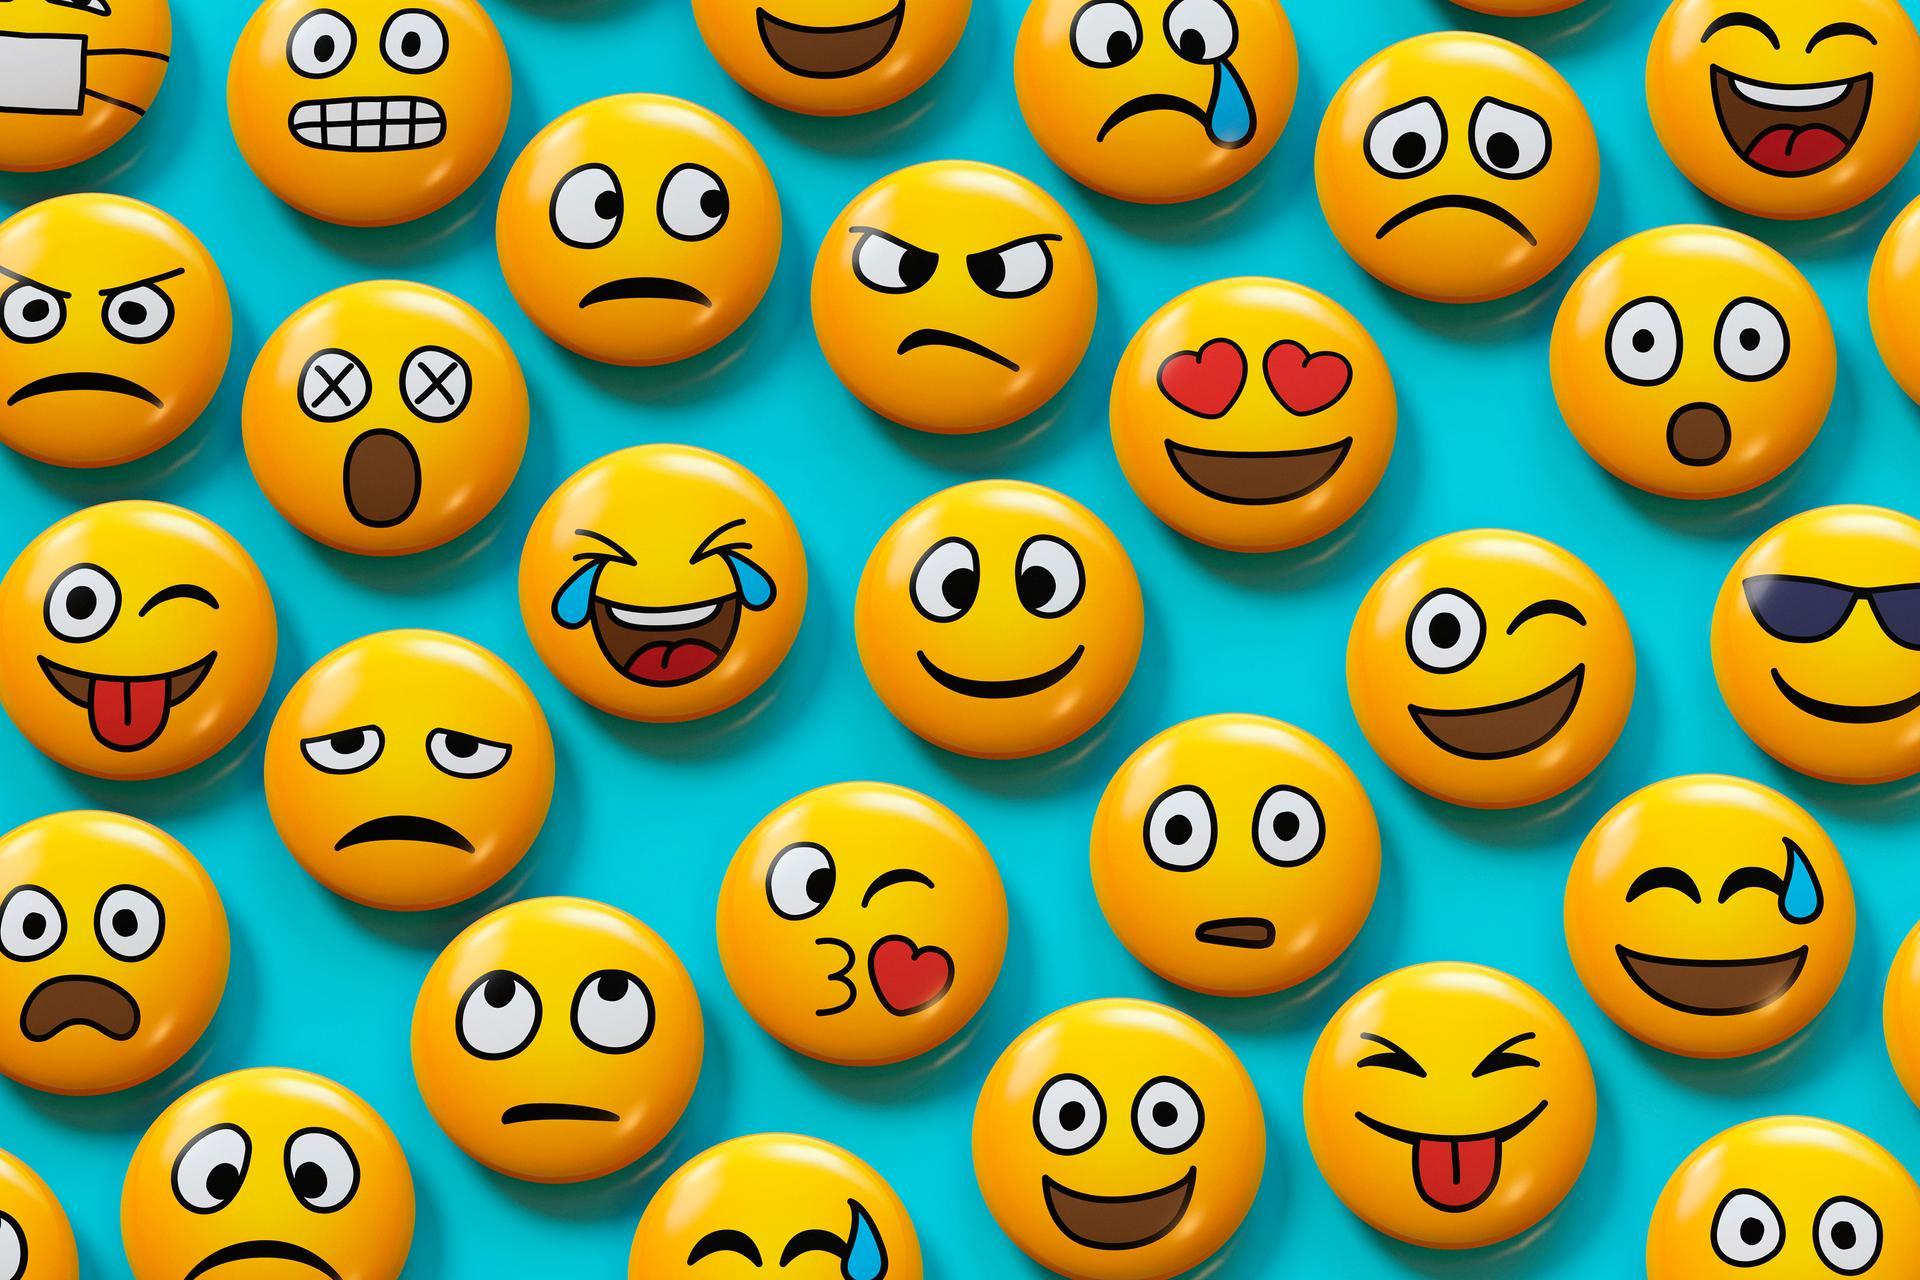 What Do Emojis Mean? How Millennials And Gen-Z Use Them Very Differently